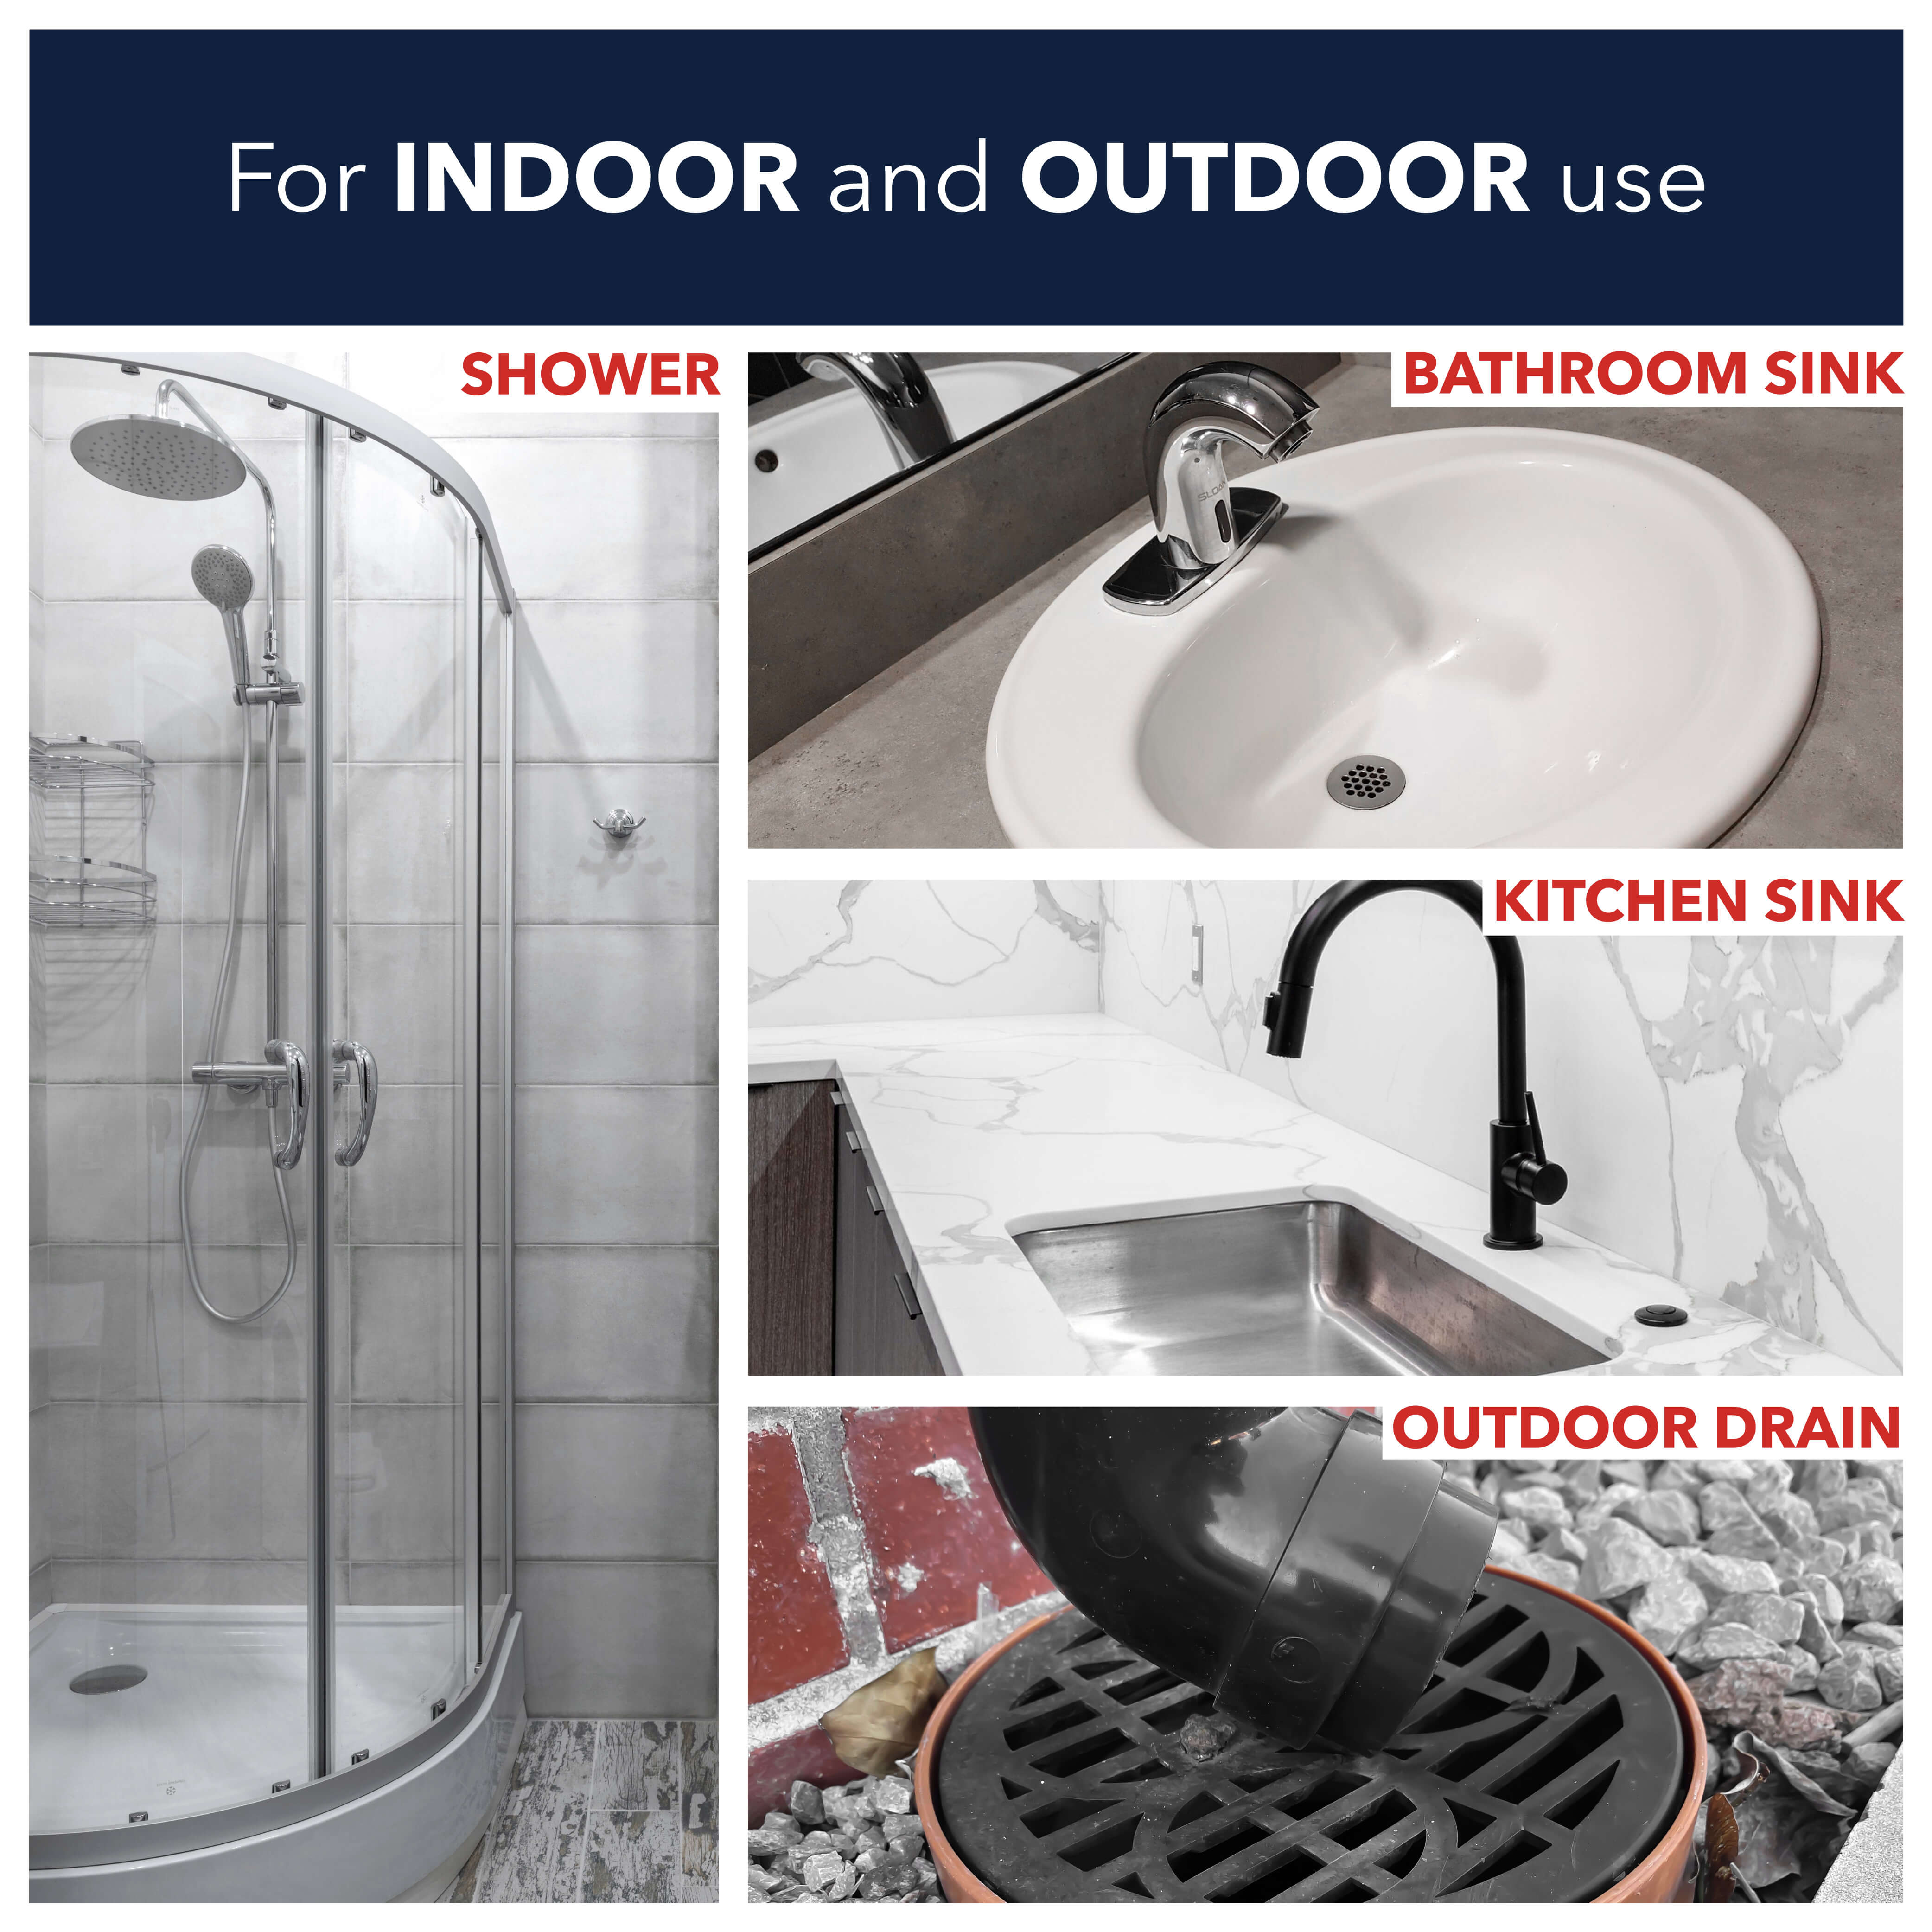 For indoor and outdoor use including showers, bathroom sinks, kitchen sinks, and outdoor drains